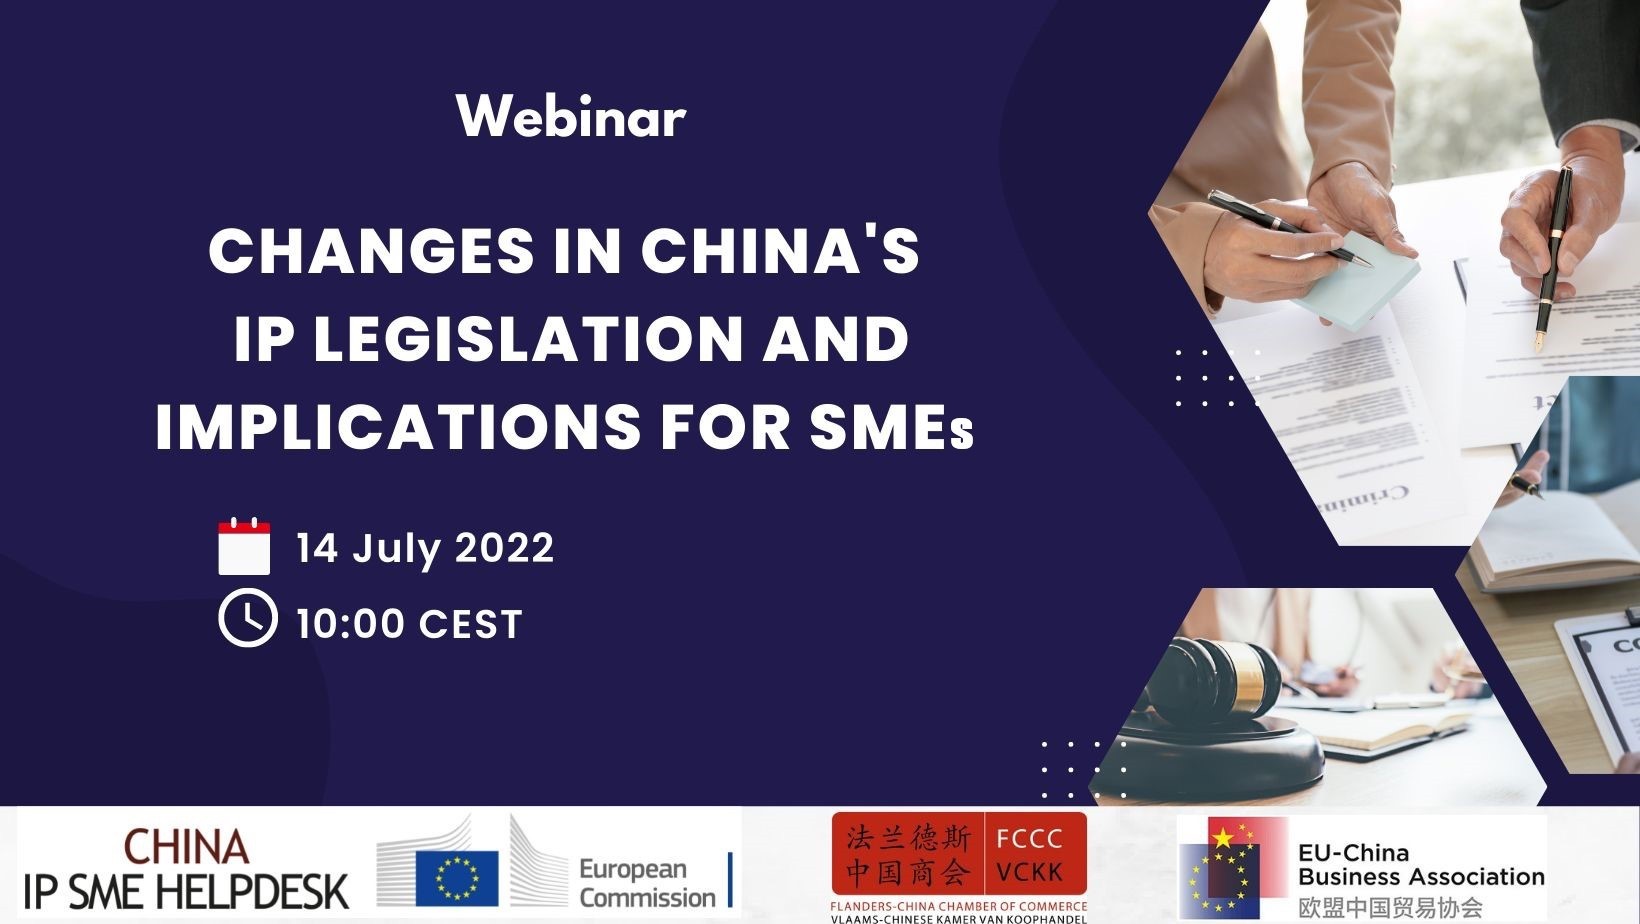 Webinar: Changes in China's IP legislation and implications for SMEs - July 14, 10h00 CEST